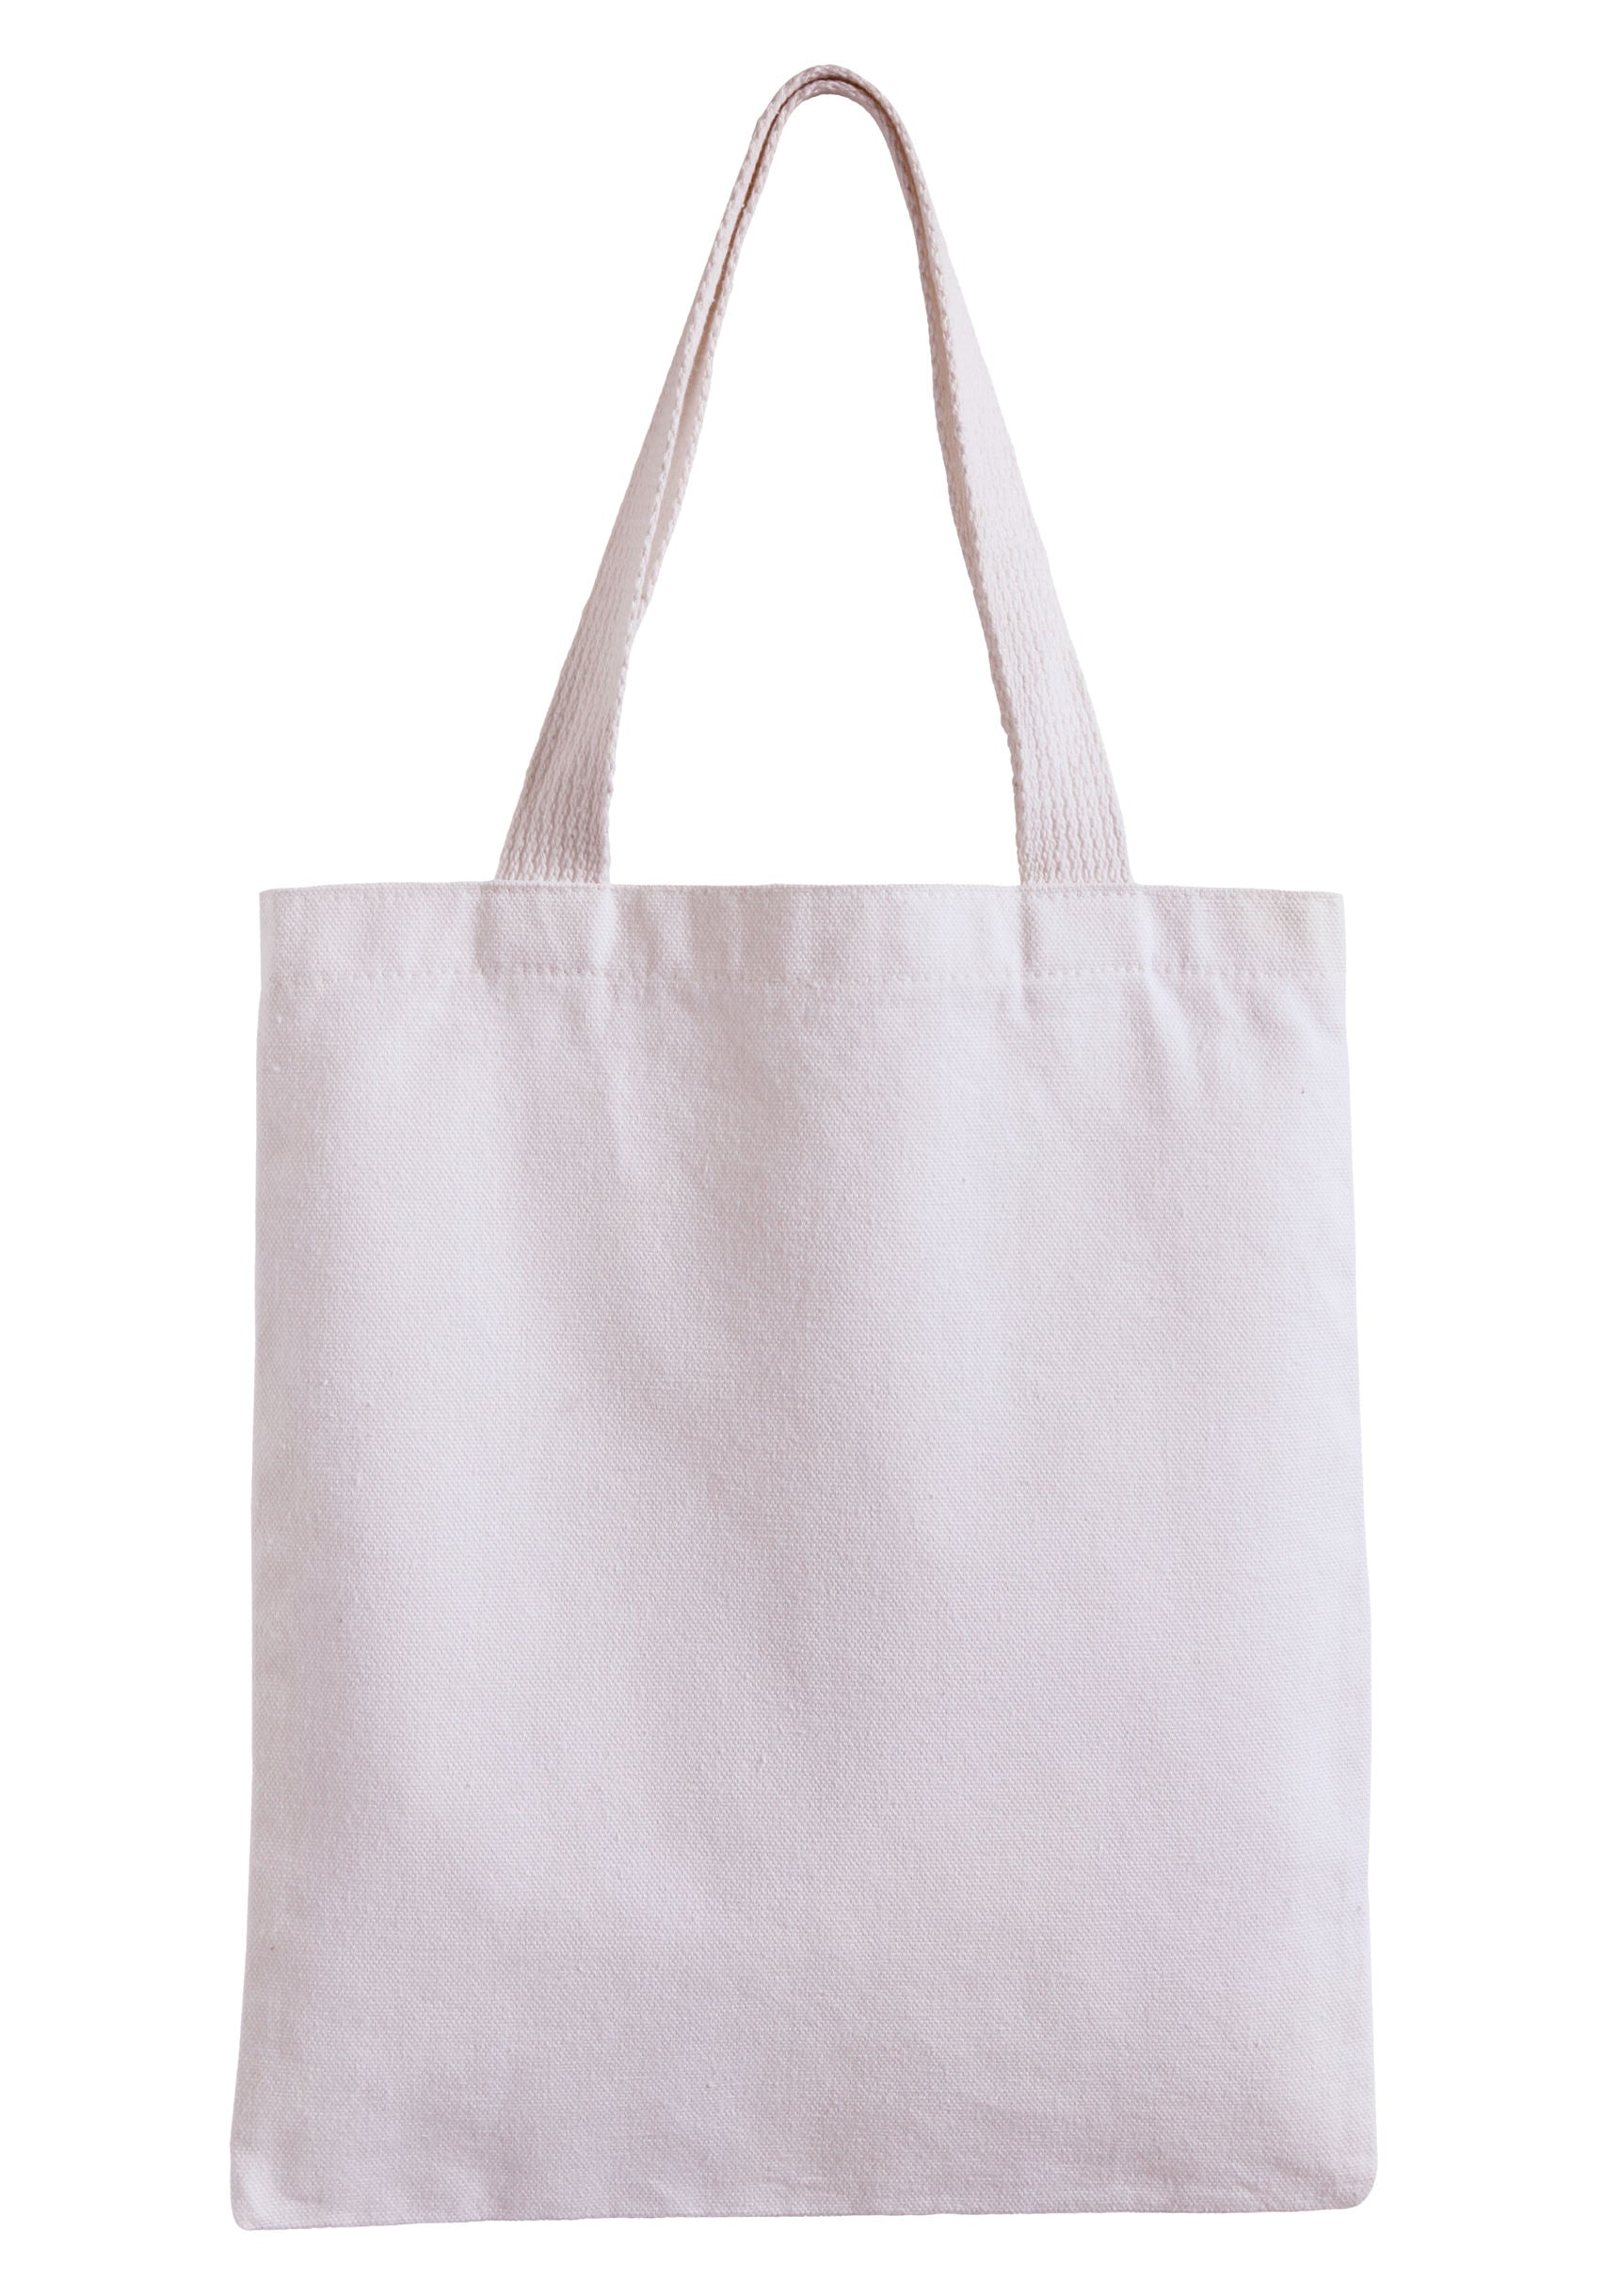 Canvas Tote Bag - Black- Blank for HTV or Embroidery